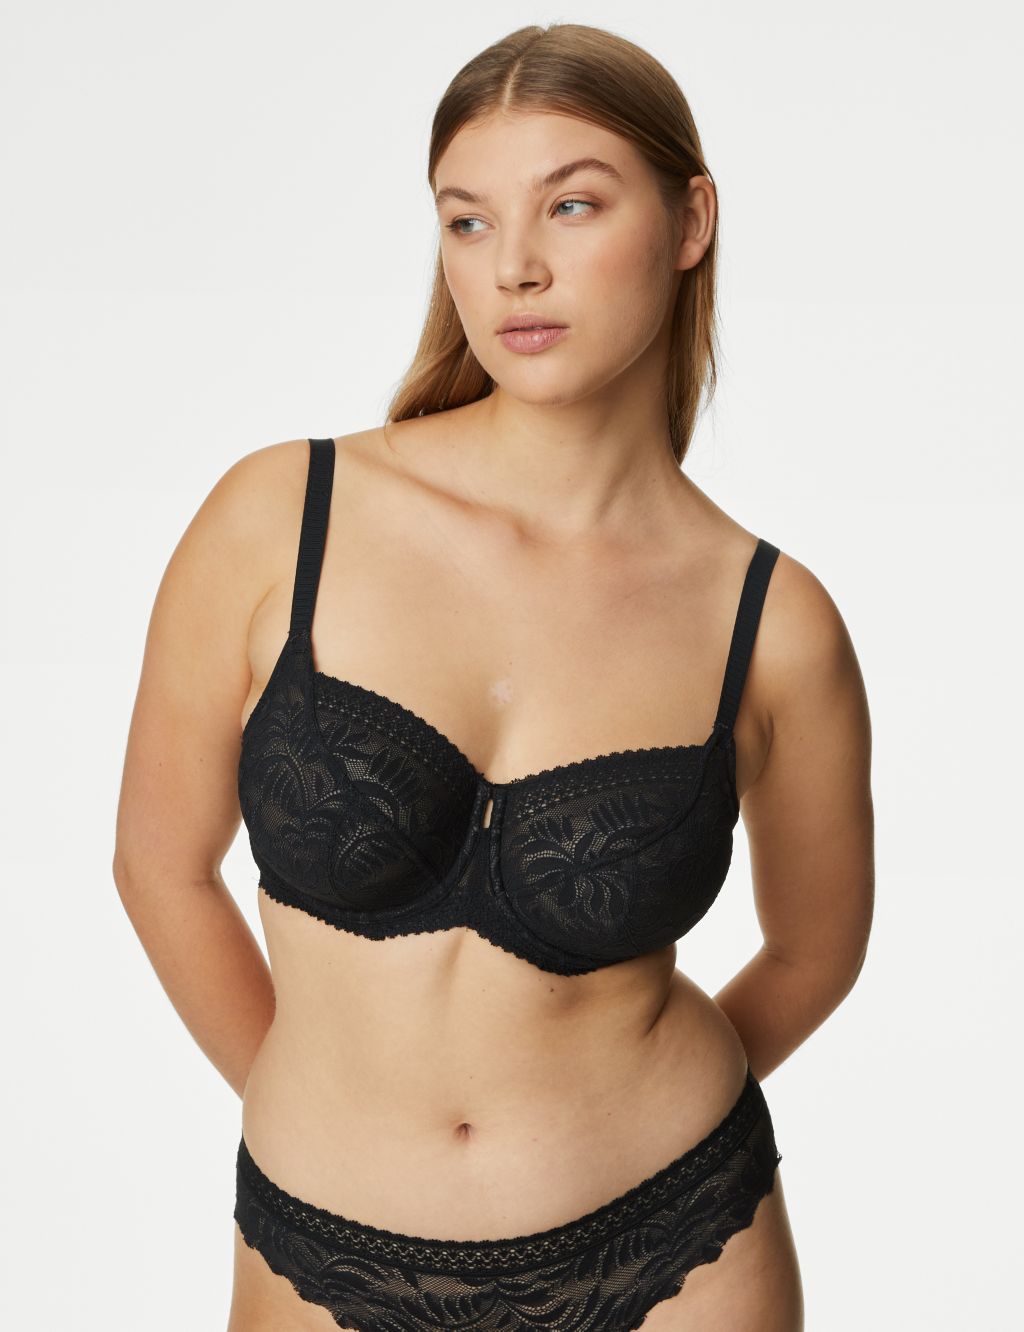 NEW M&S Ladies Navy Mix Balcony Bras 3 Pack Sizes 32D, 32DD, 42A